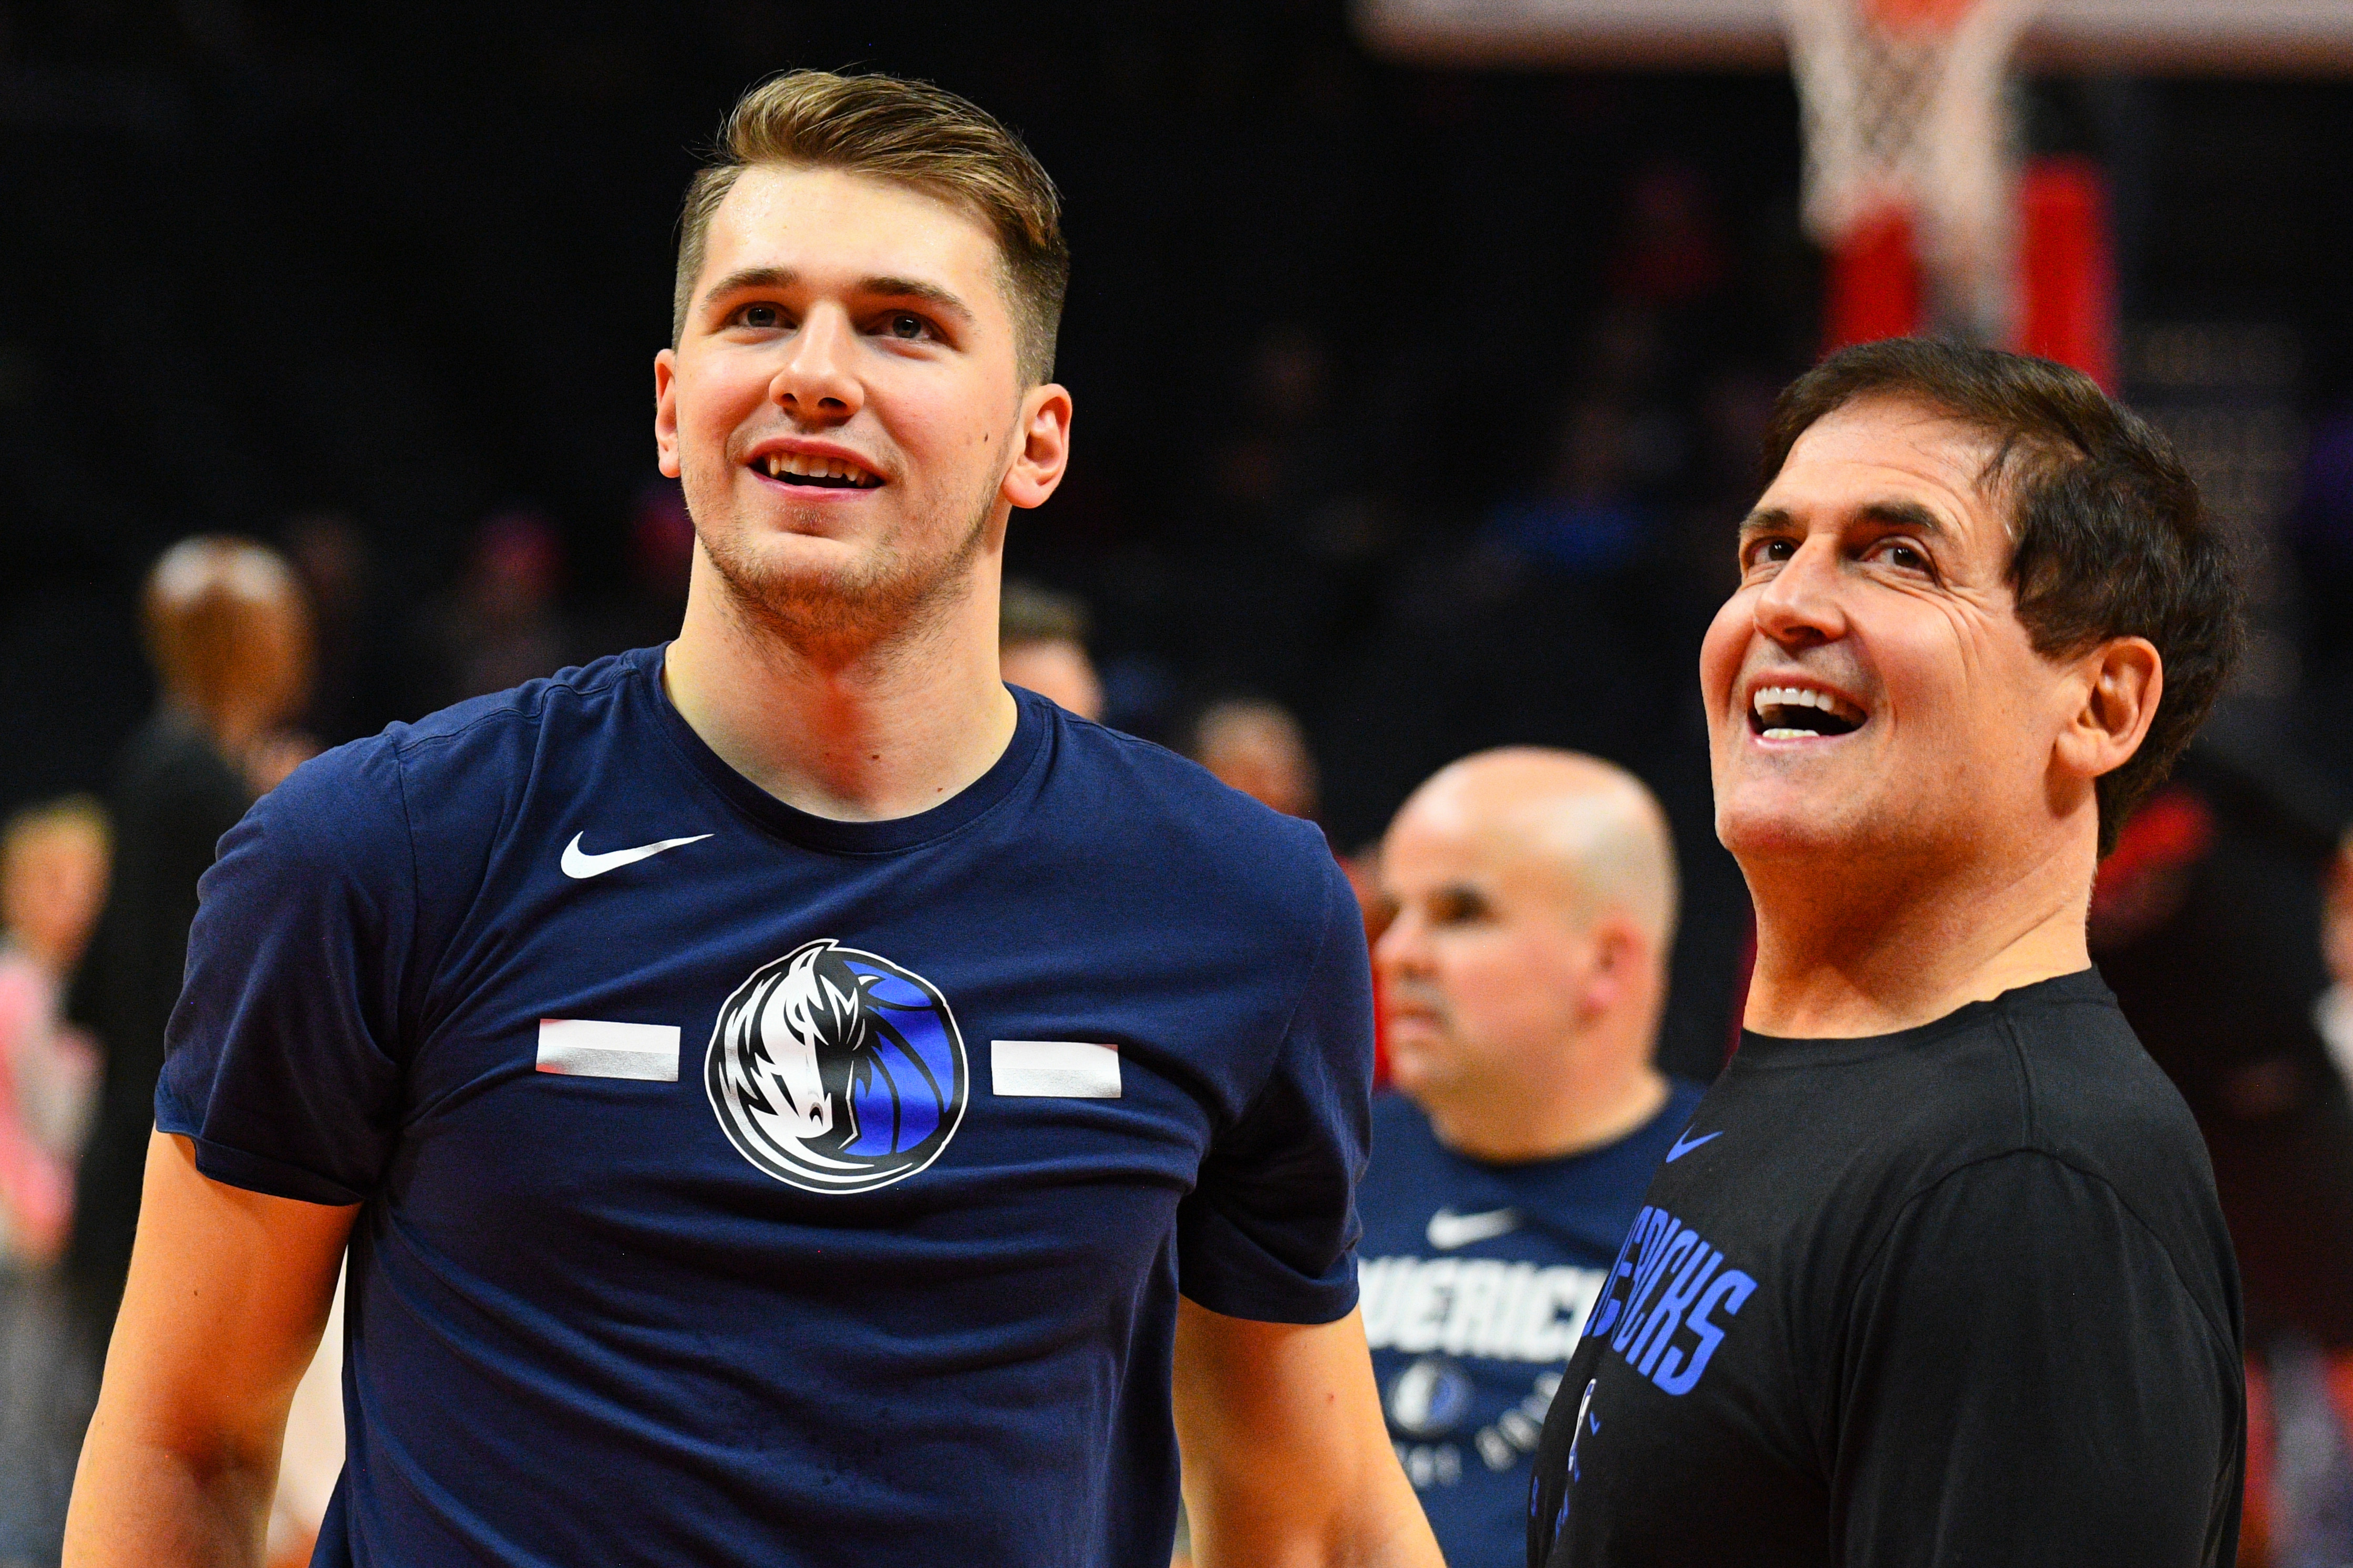 LOS ANGELES, CA - DECEMBER 20: Dallas Mavericks Guard Luka Doncic (77) looks on with owner Mark Cuban before a NBA game between the Dallas Mavericks and the Los Angeles Clippers on December 20, 2018 at STAPLES Center in Los Angeles, CA. (Photo by Brian Rothmuller/Icon Sportswire via Getty Images)